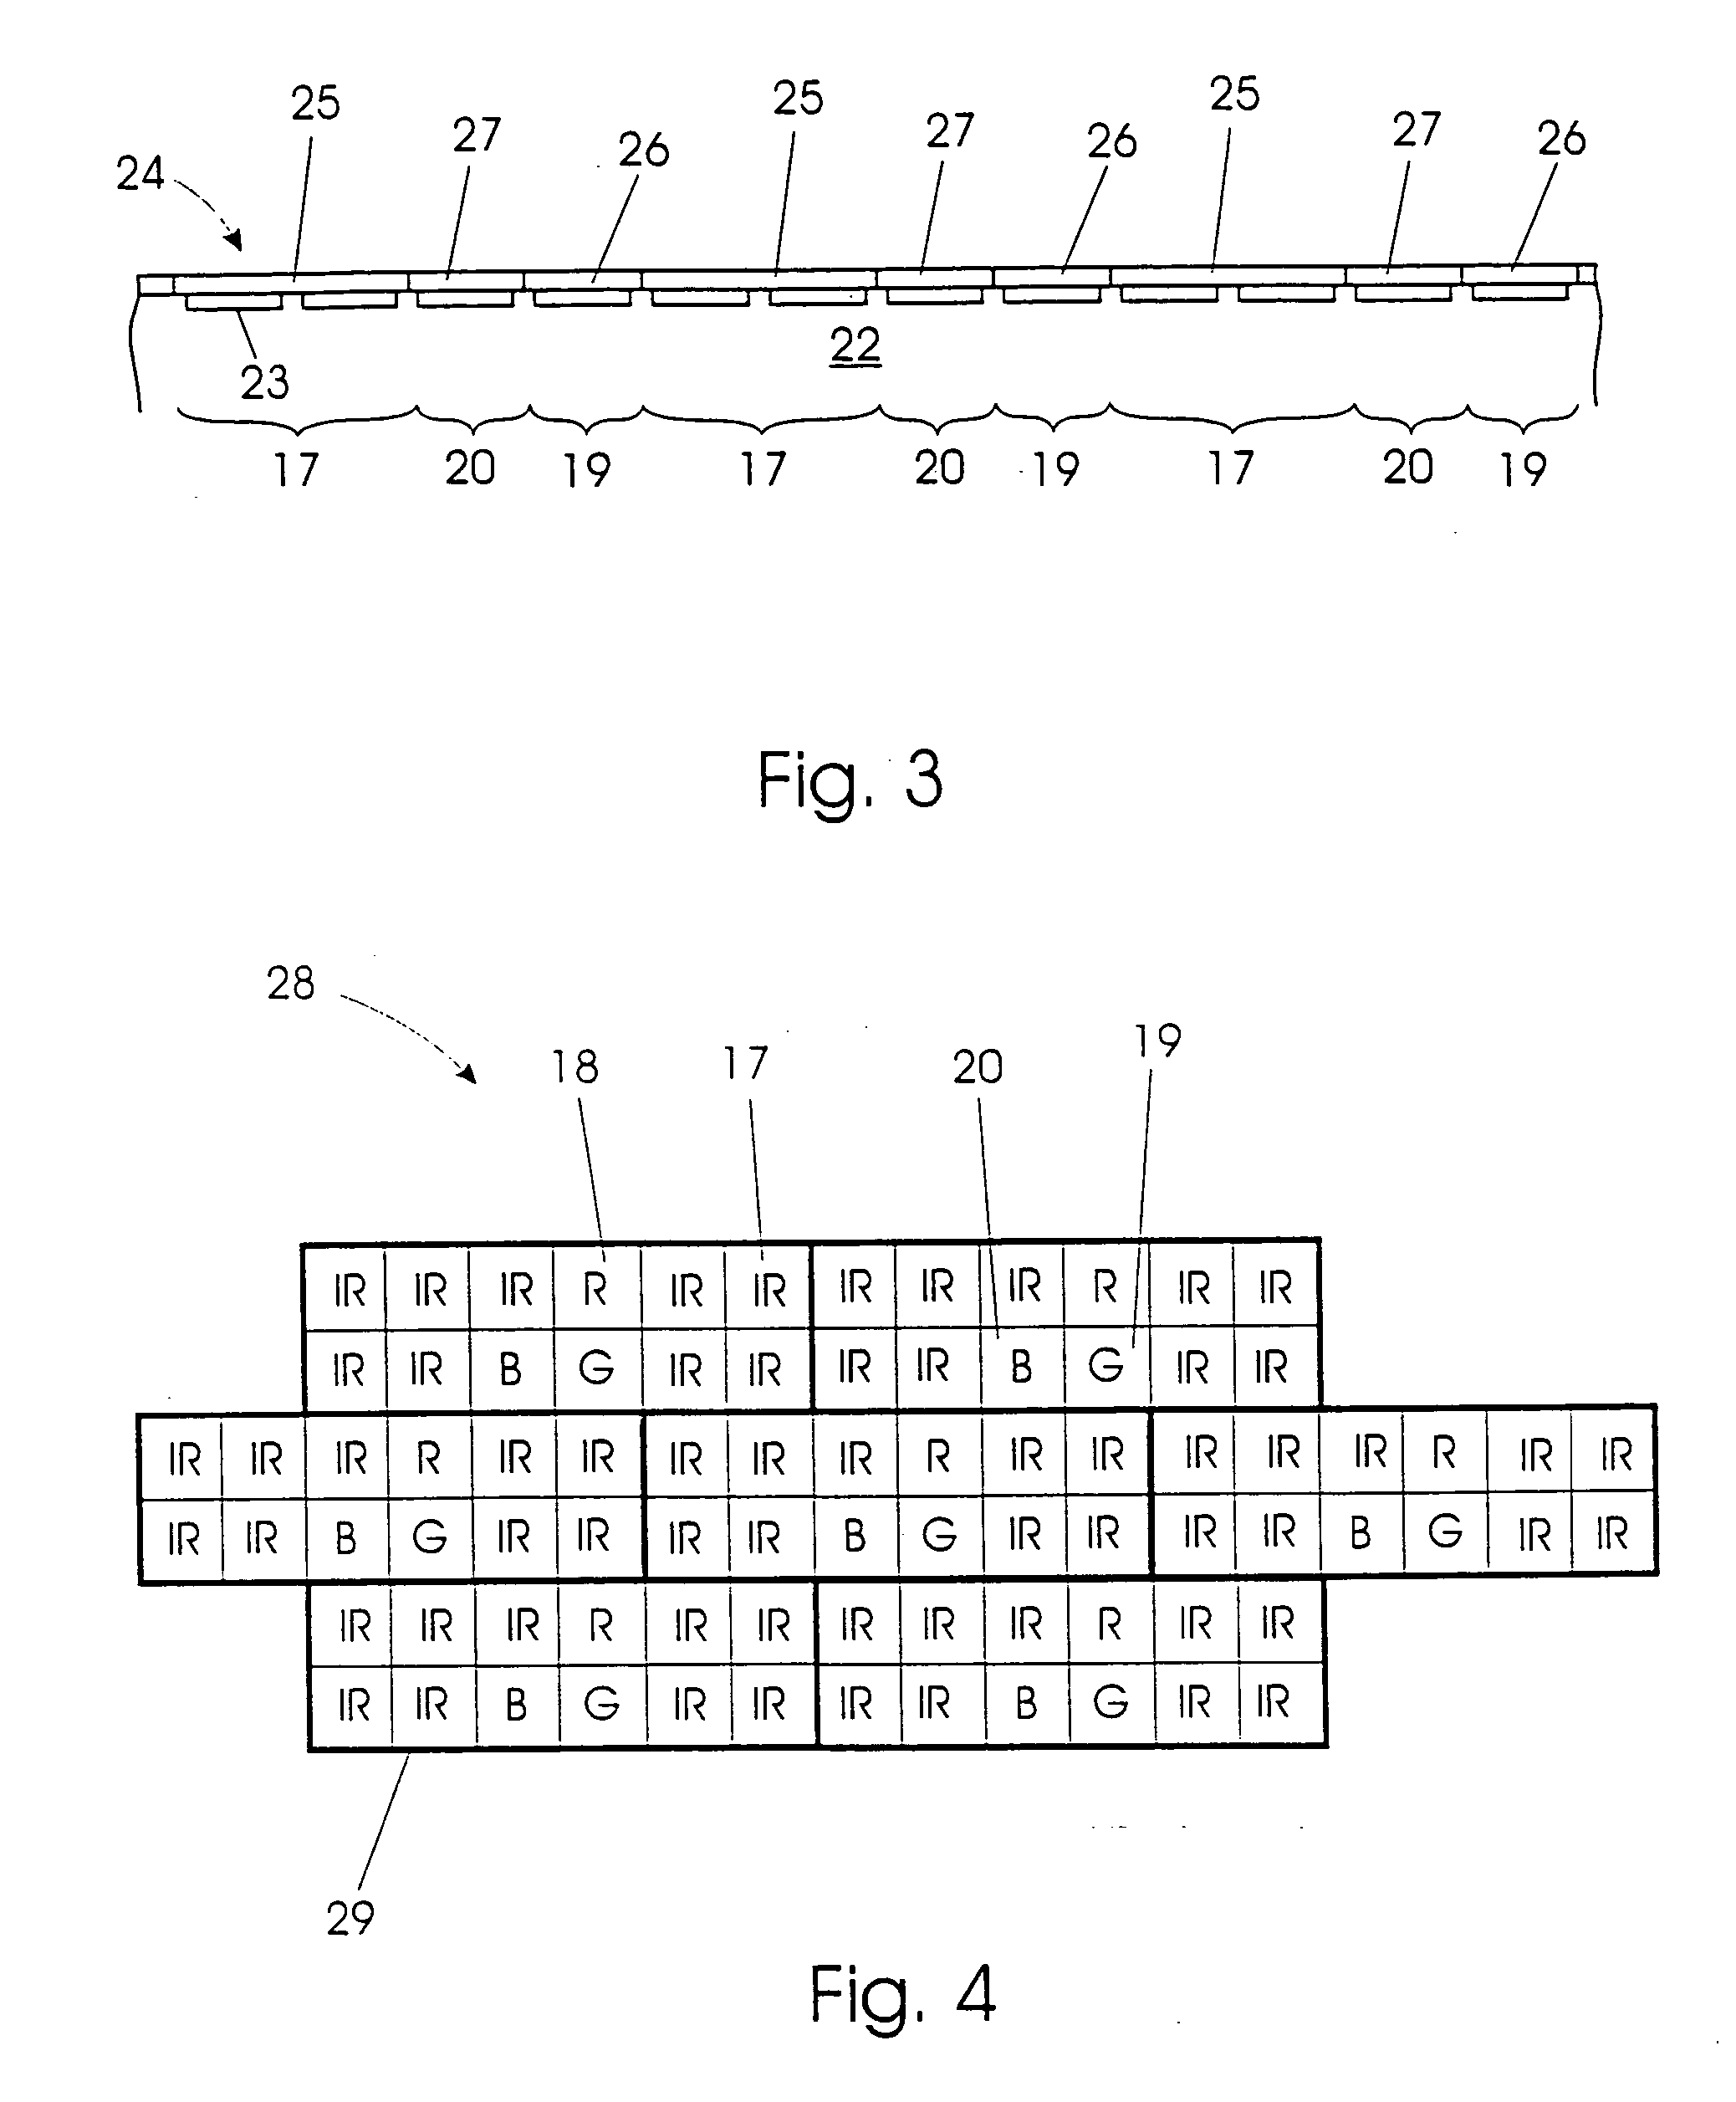 Sensor array with a number of types of optical sensors